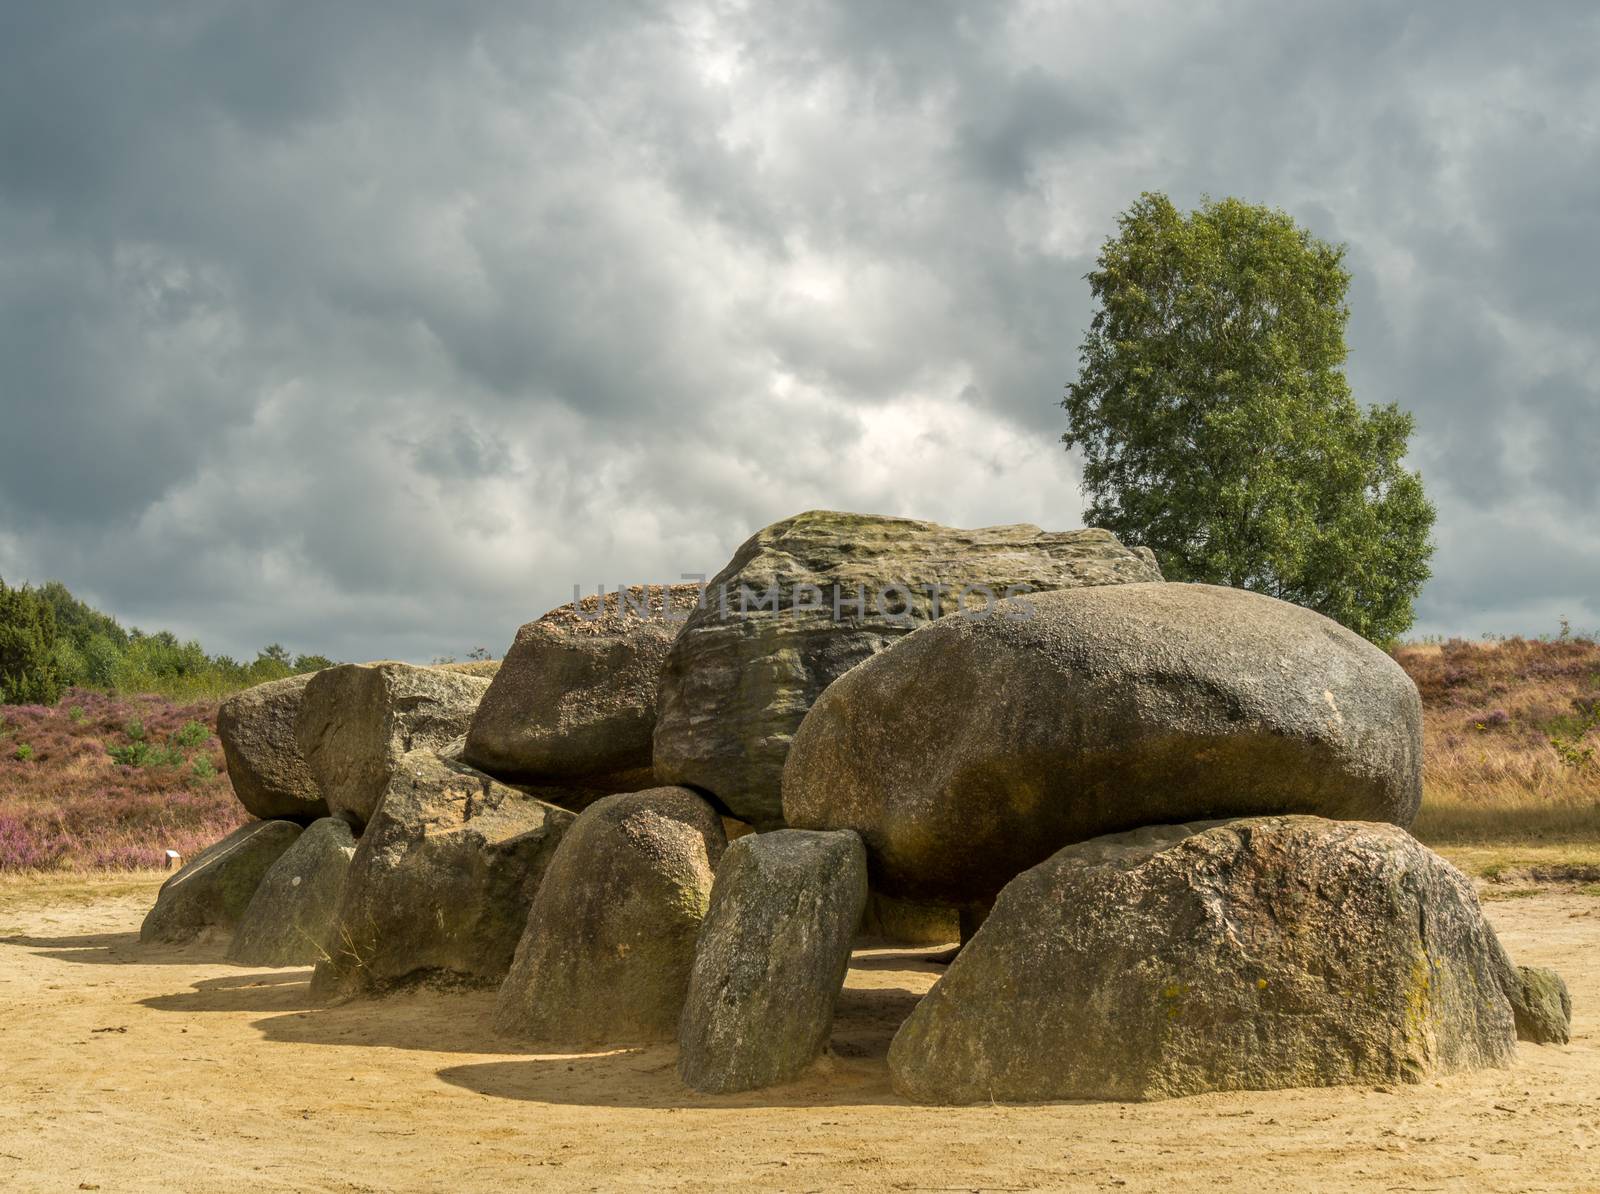 Dramatic sky over megalithic stones in Drenthe, Netherlands. Dark clouds give dramatic view